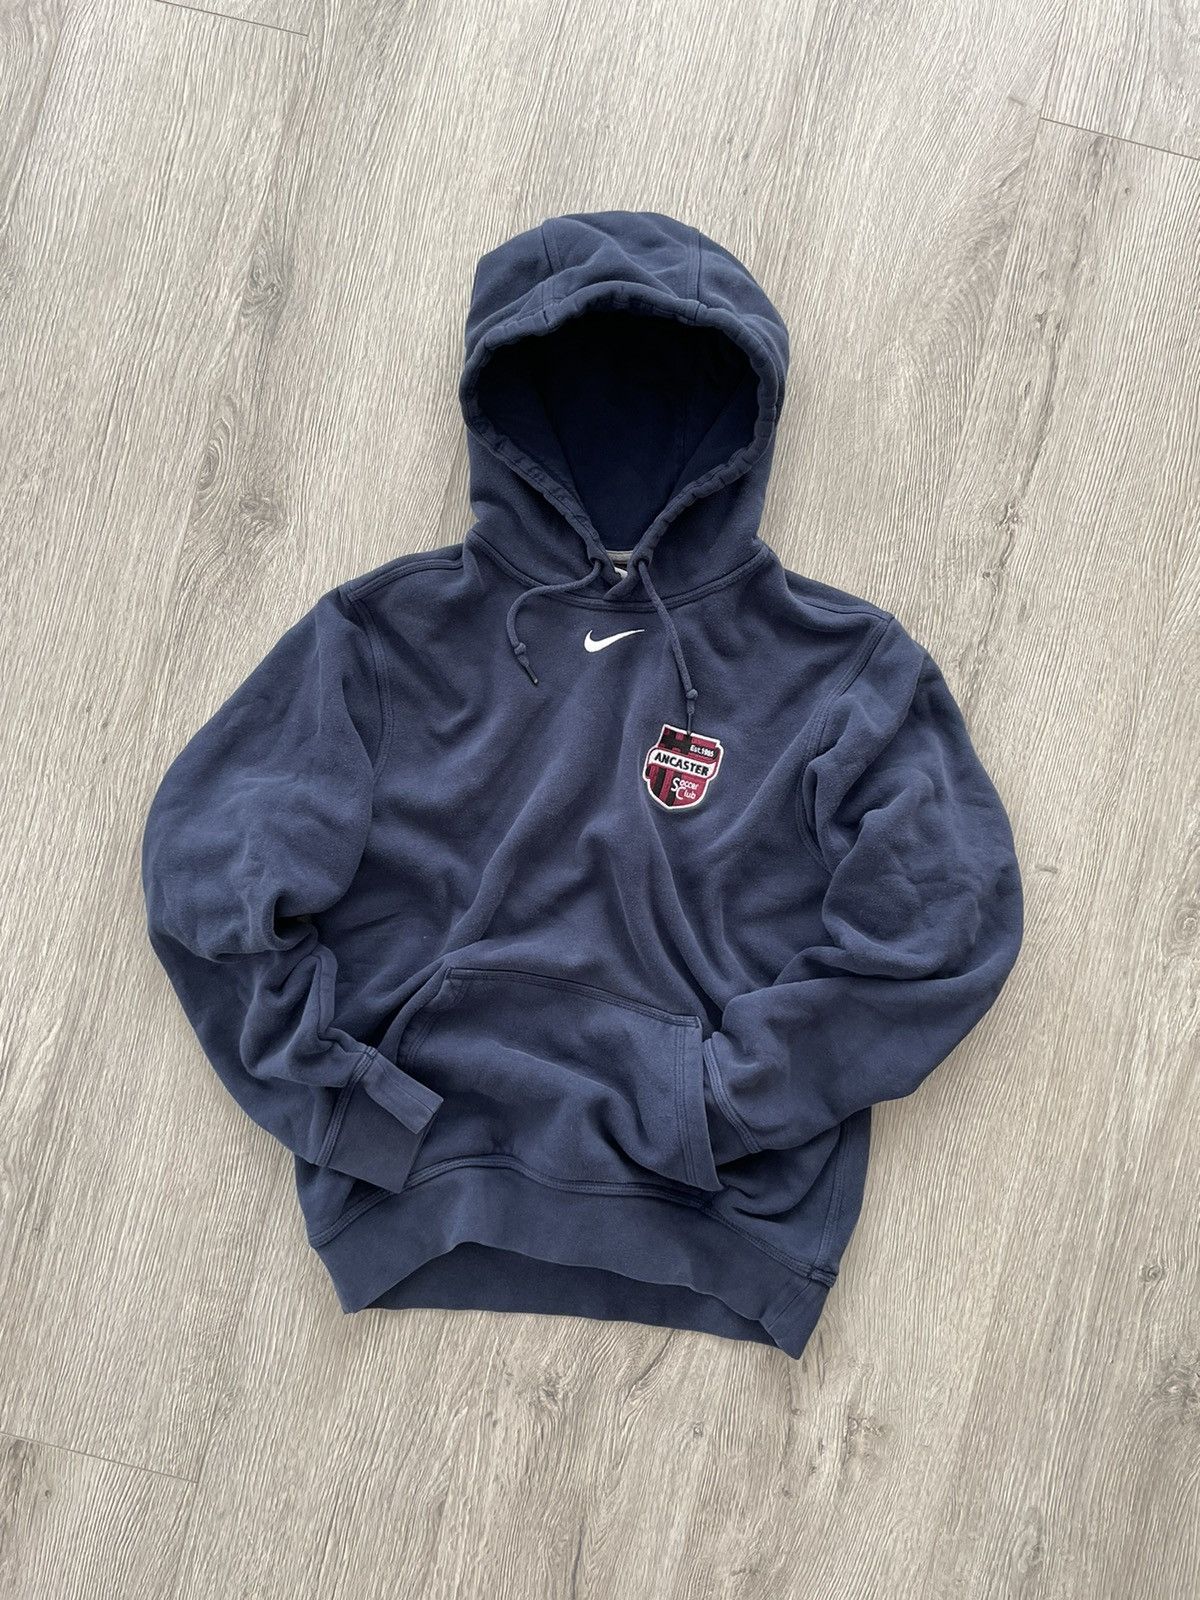 Nike STEAL Nike Middle Swoosh Check Hoodie Navy Blue 90s Travis Size US S / EU 44-46 / 1 - 1 Preview